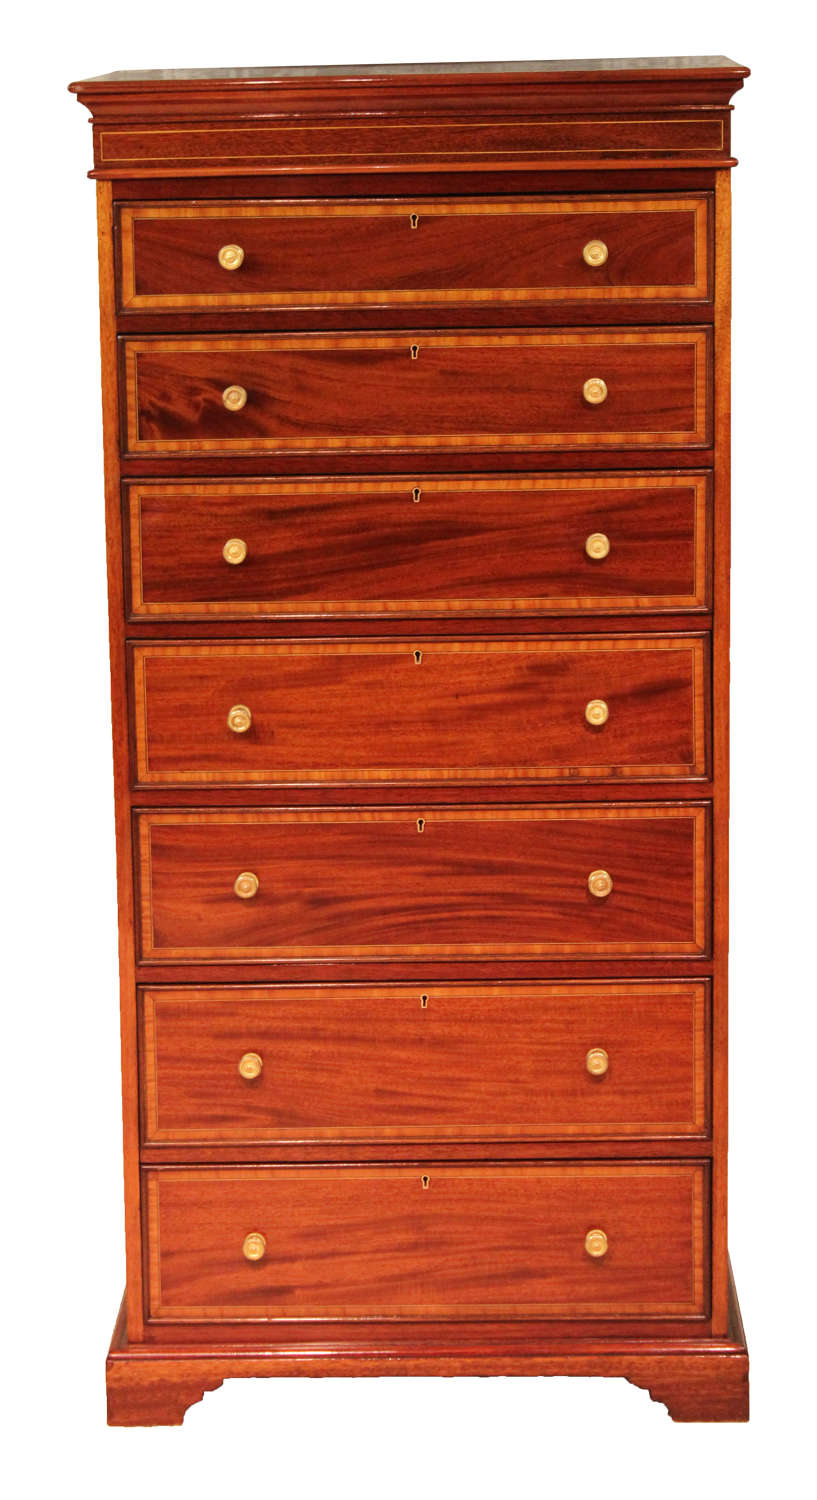 A Superb Edwardian Mahogany Inlaid Pedestal Chest Of Drawers